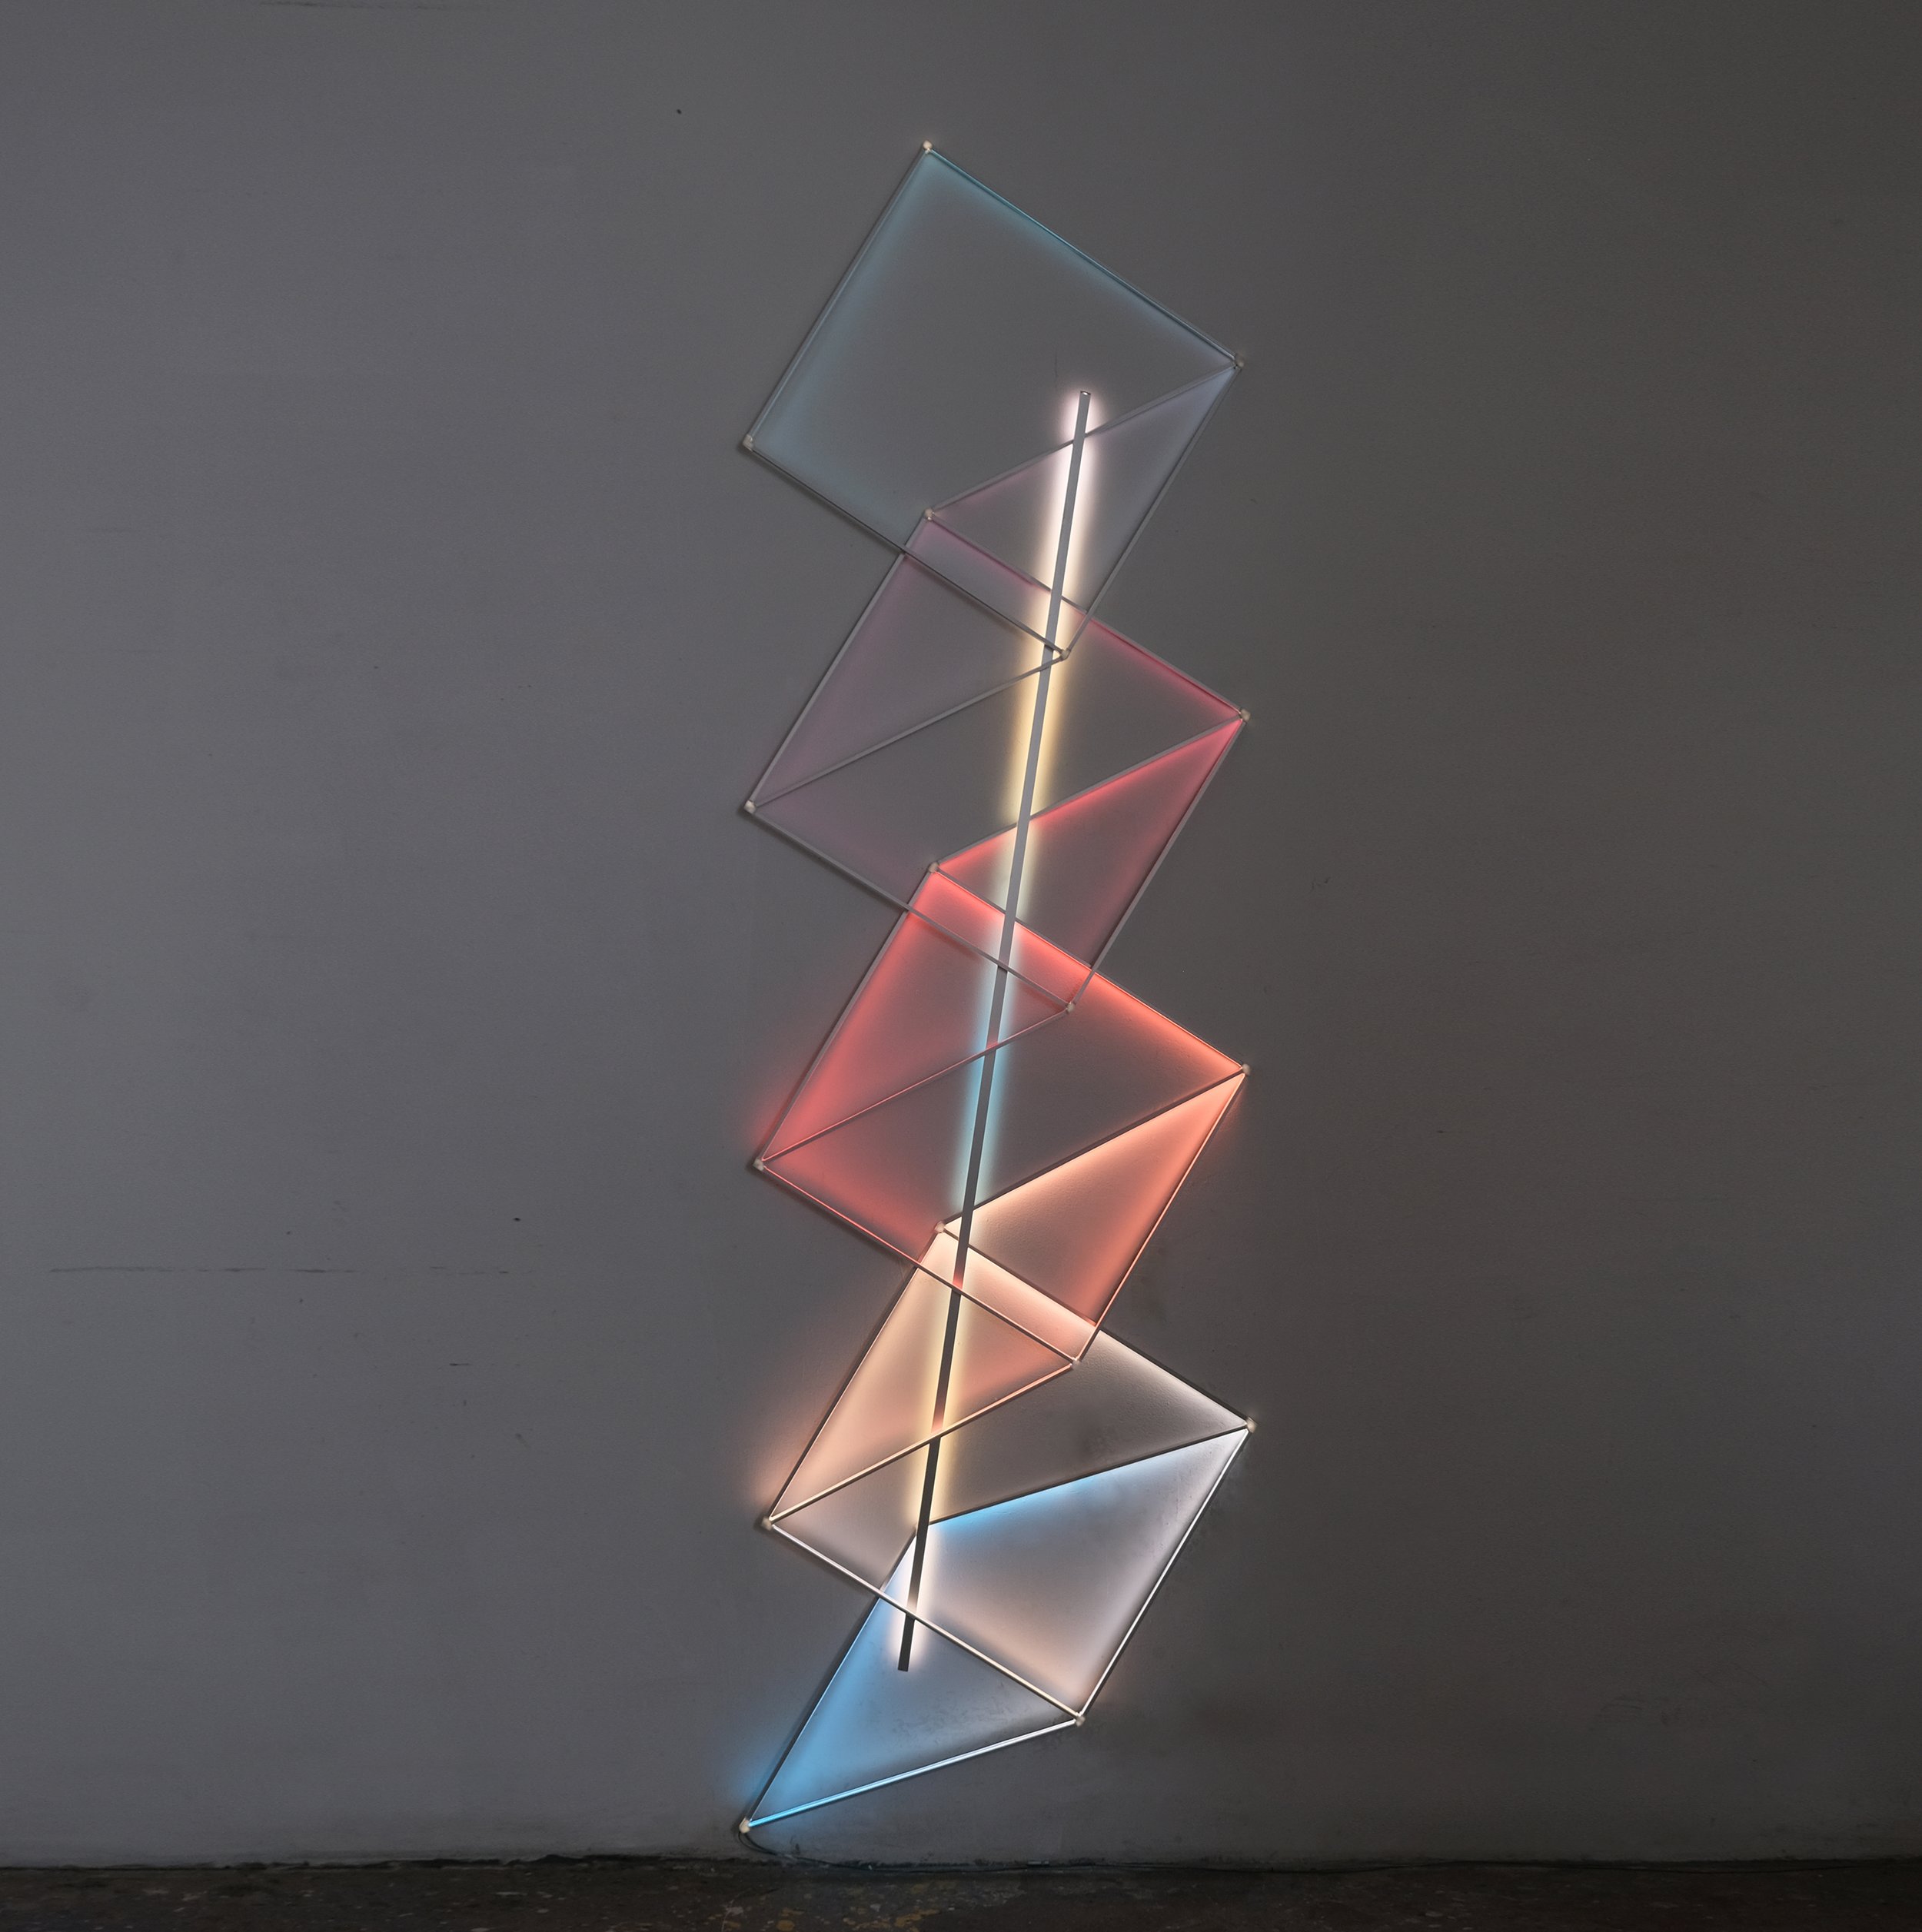   James Clar,   Space Folding,  2021, LEDs, aluminum, filters, 3D printed material, 96 x 29 inches.  